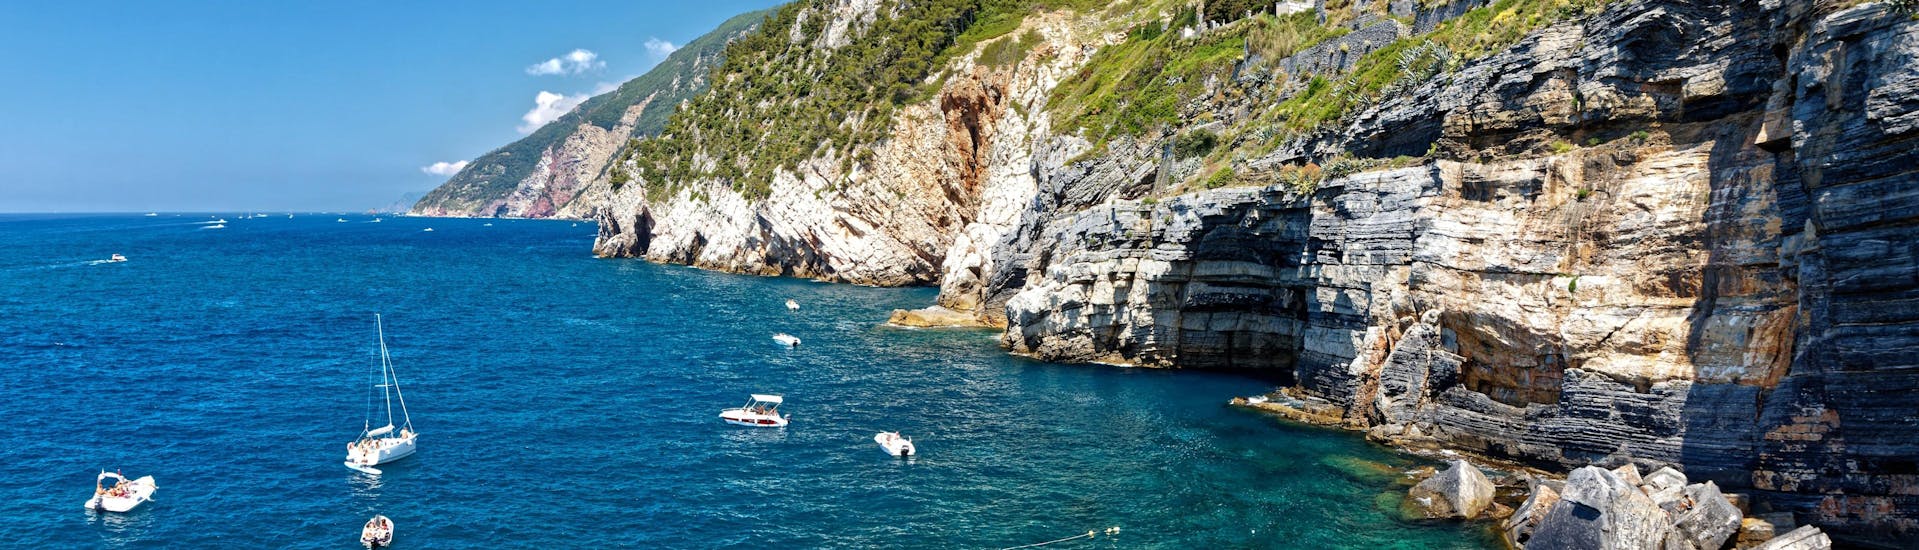 View over the Lord Byron's Cave, that you can admire during a boat trip in Portovenere.